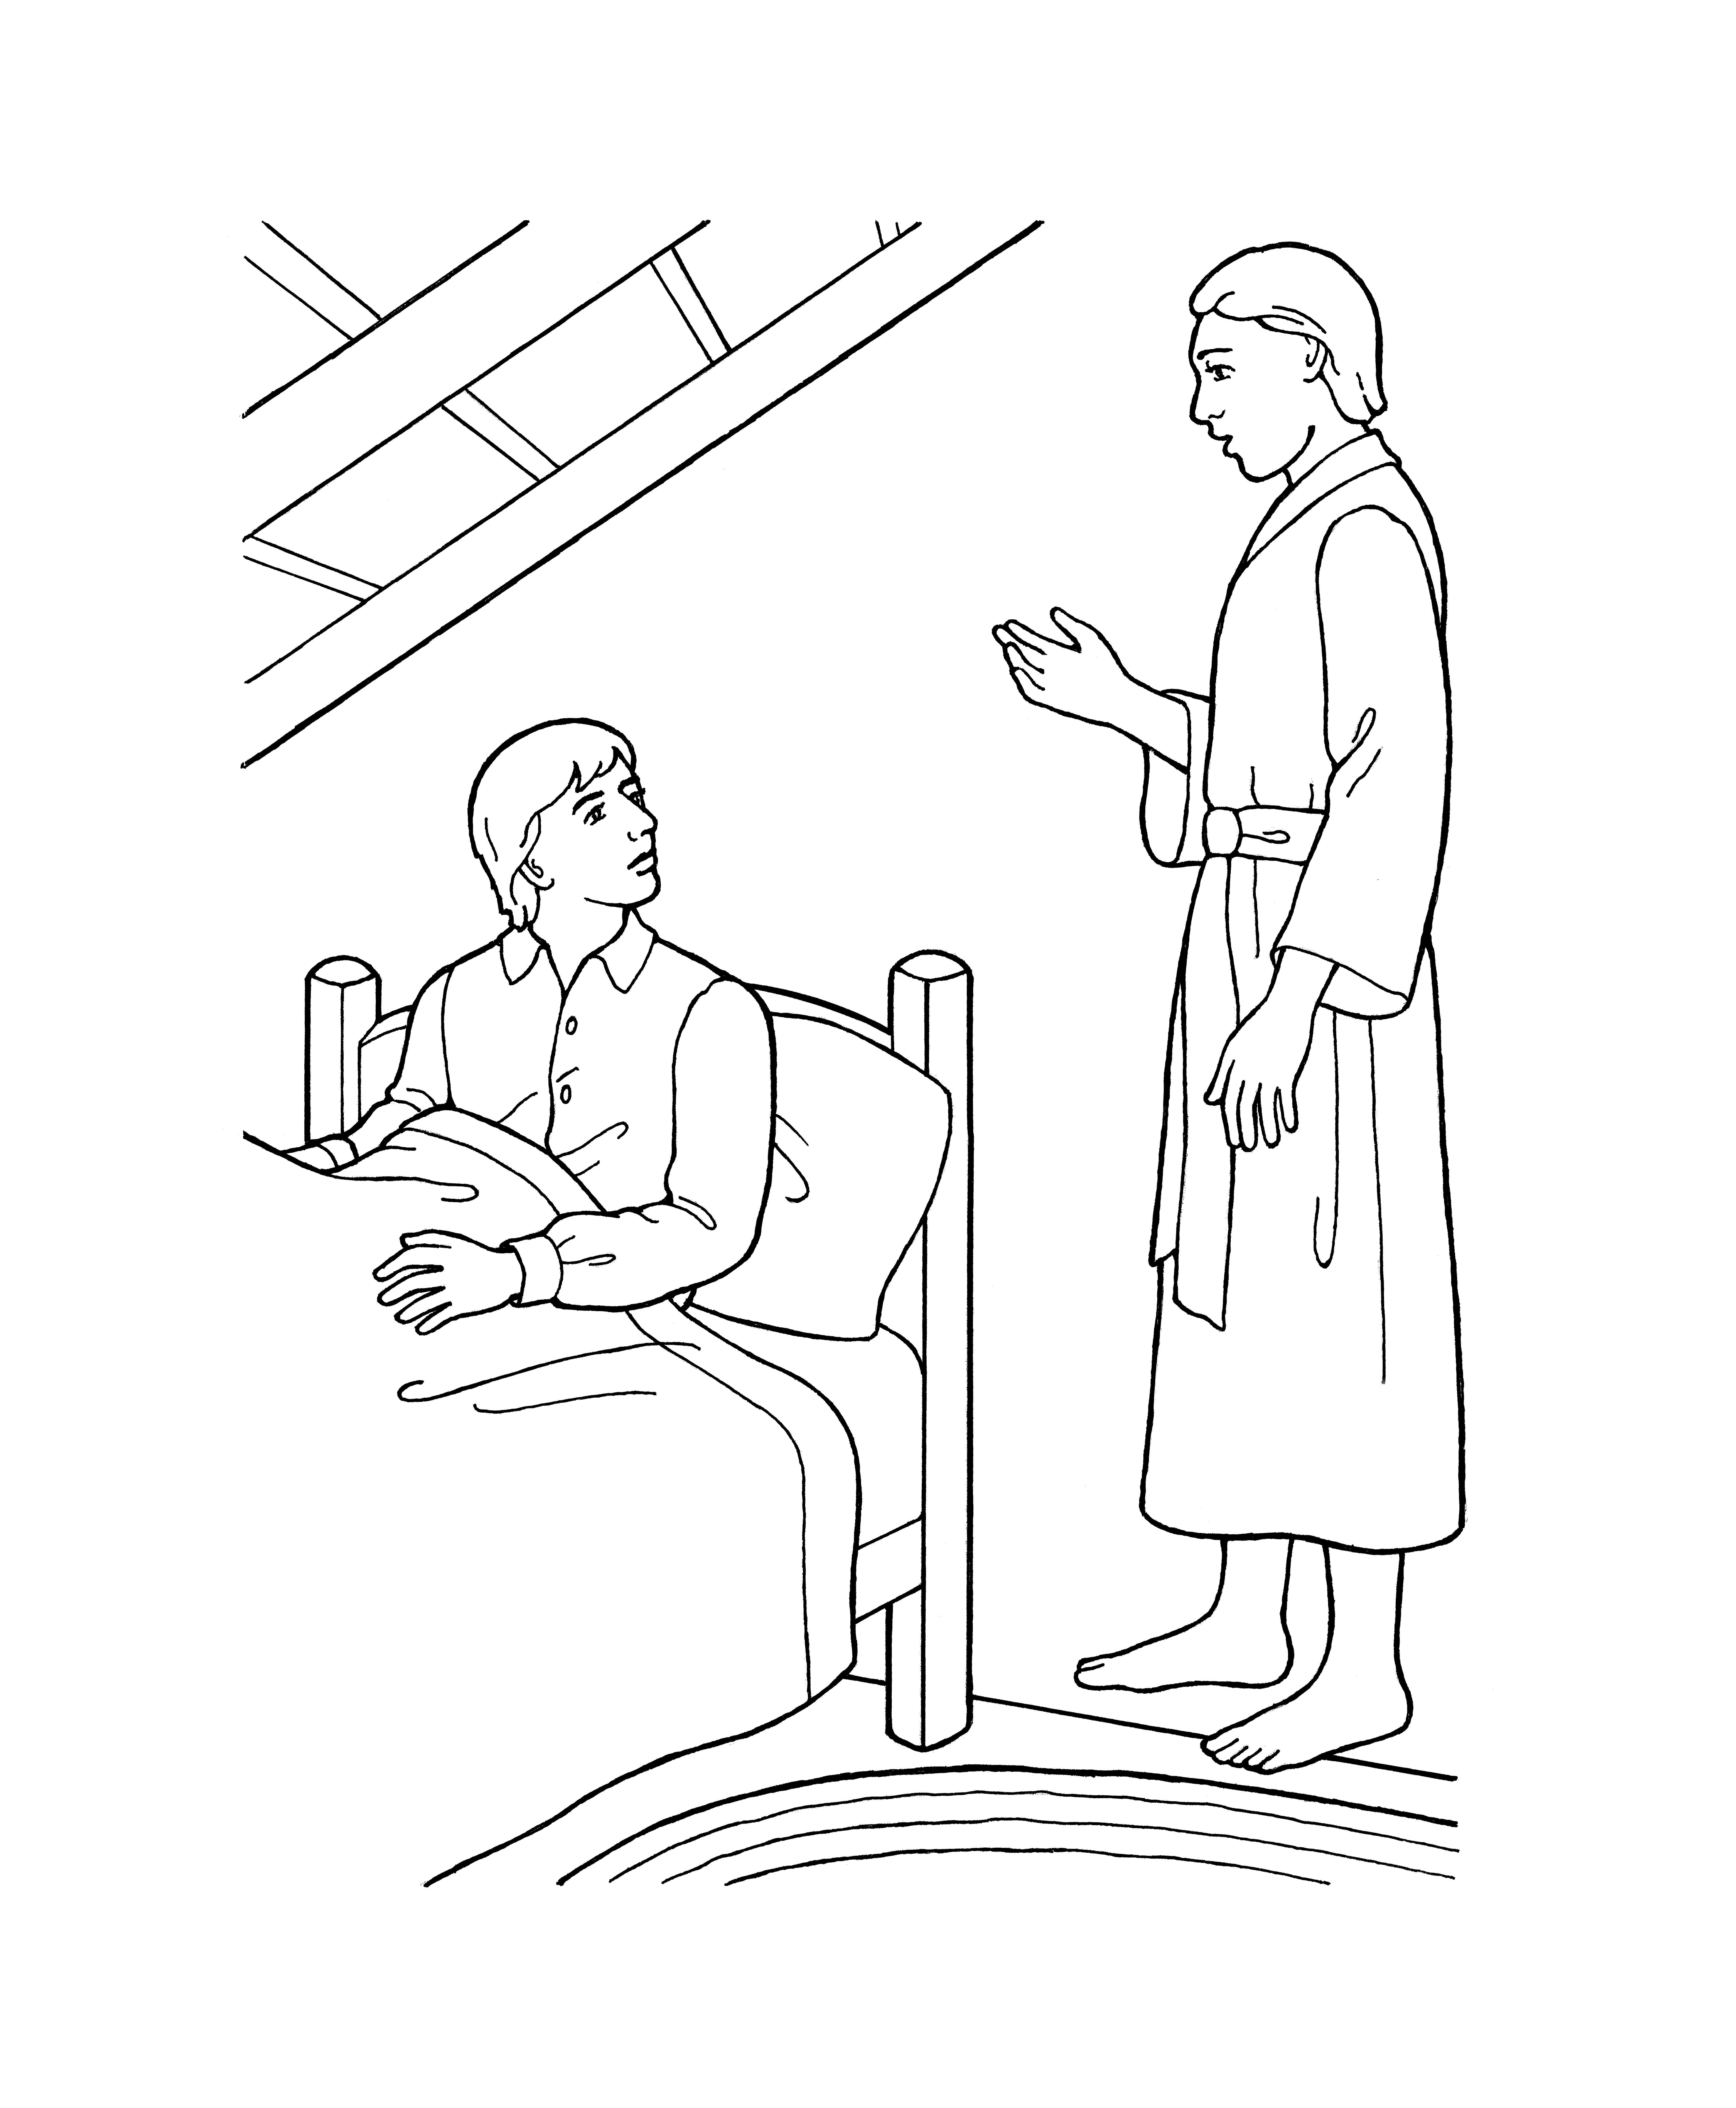 An illustration of the ninth article of faith—“Revelation” (the angel Moroni appearing to Joseph Smith).